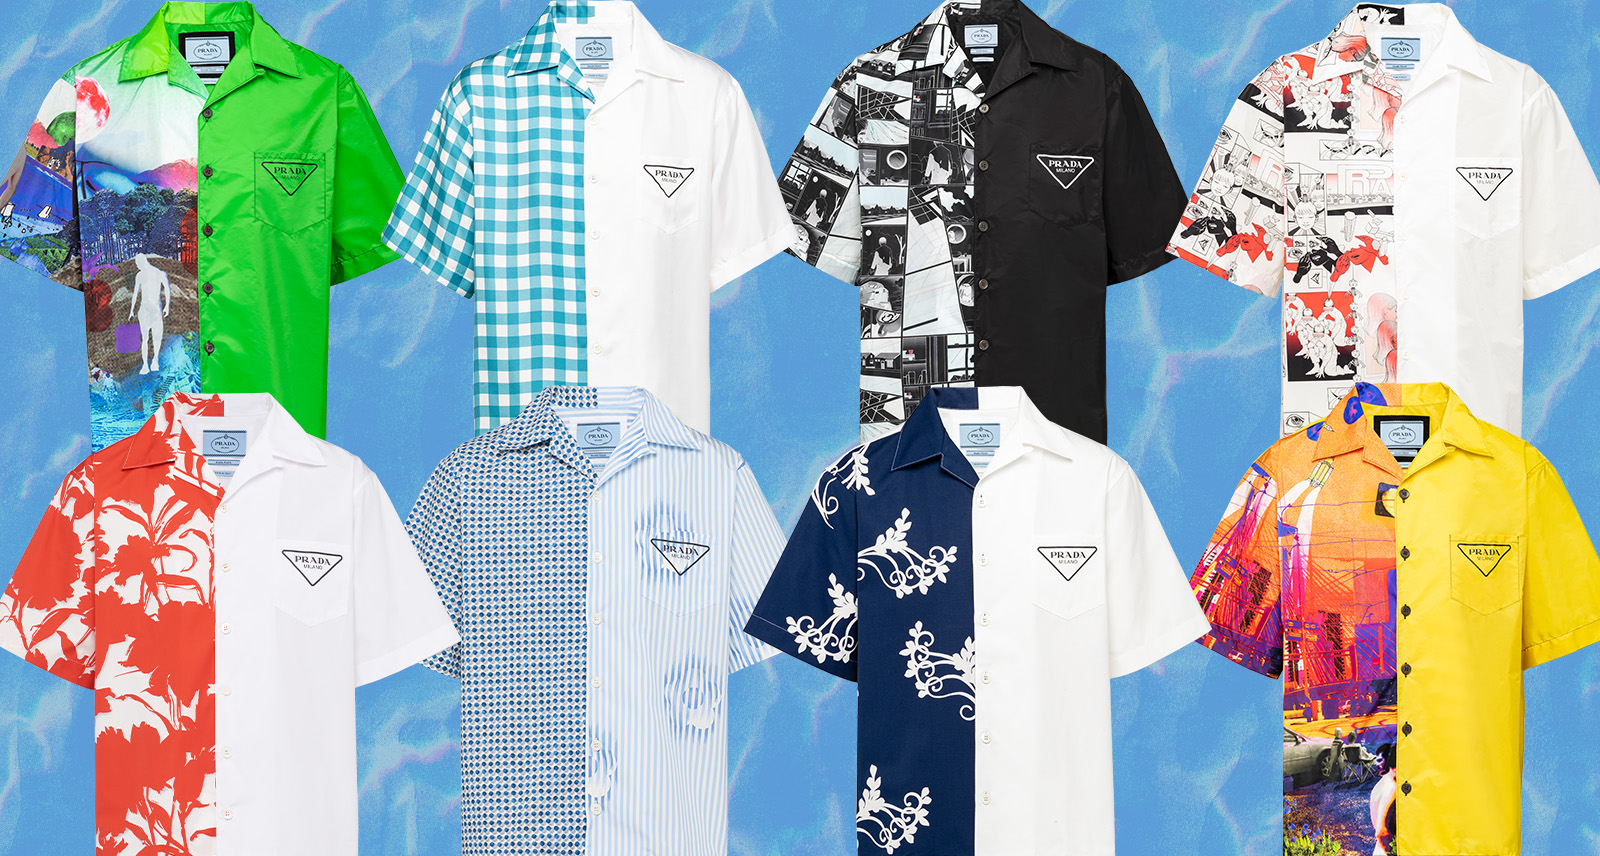 Prada Double Match Shirt collage of all eight styles with water-textured blue background